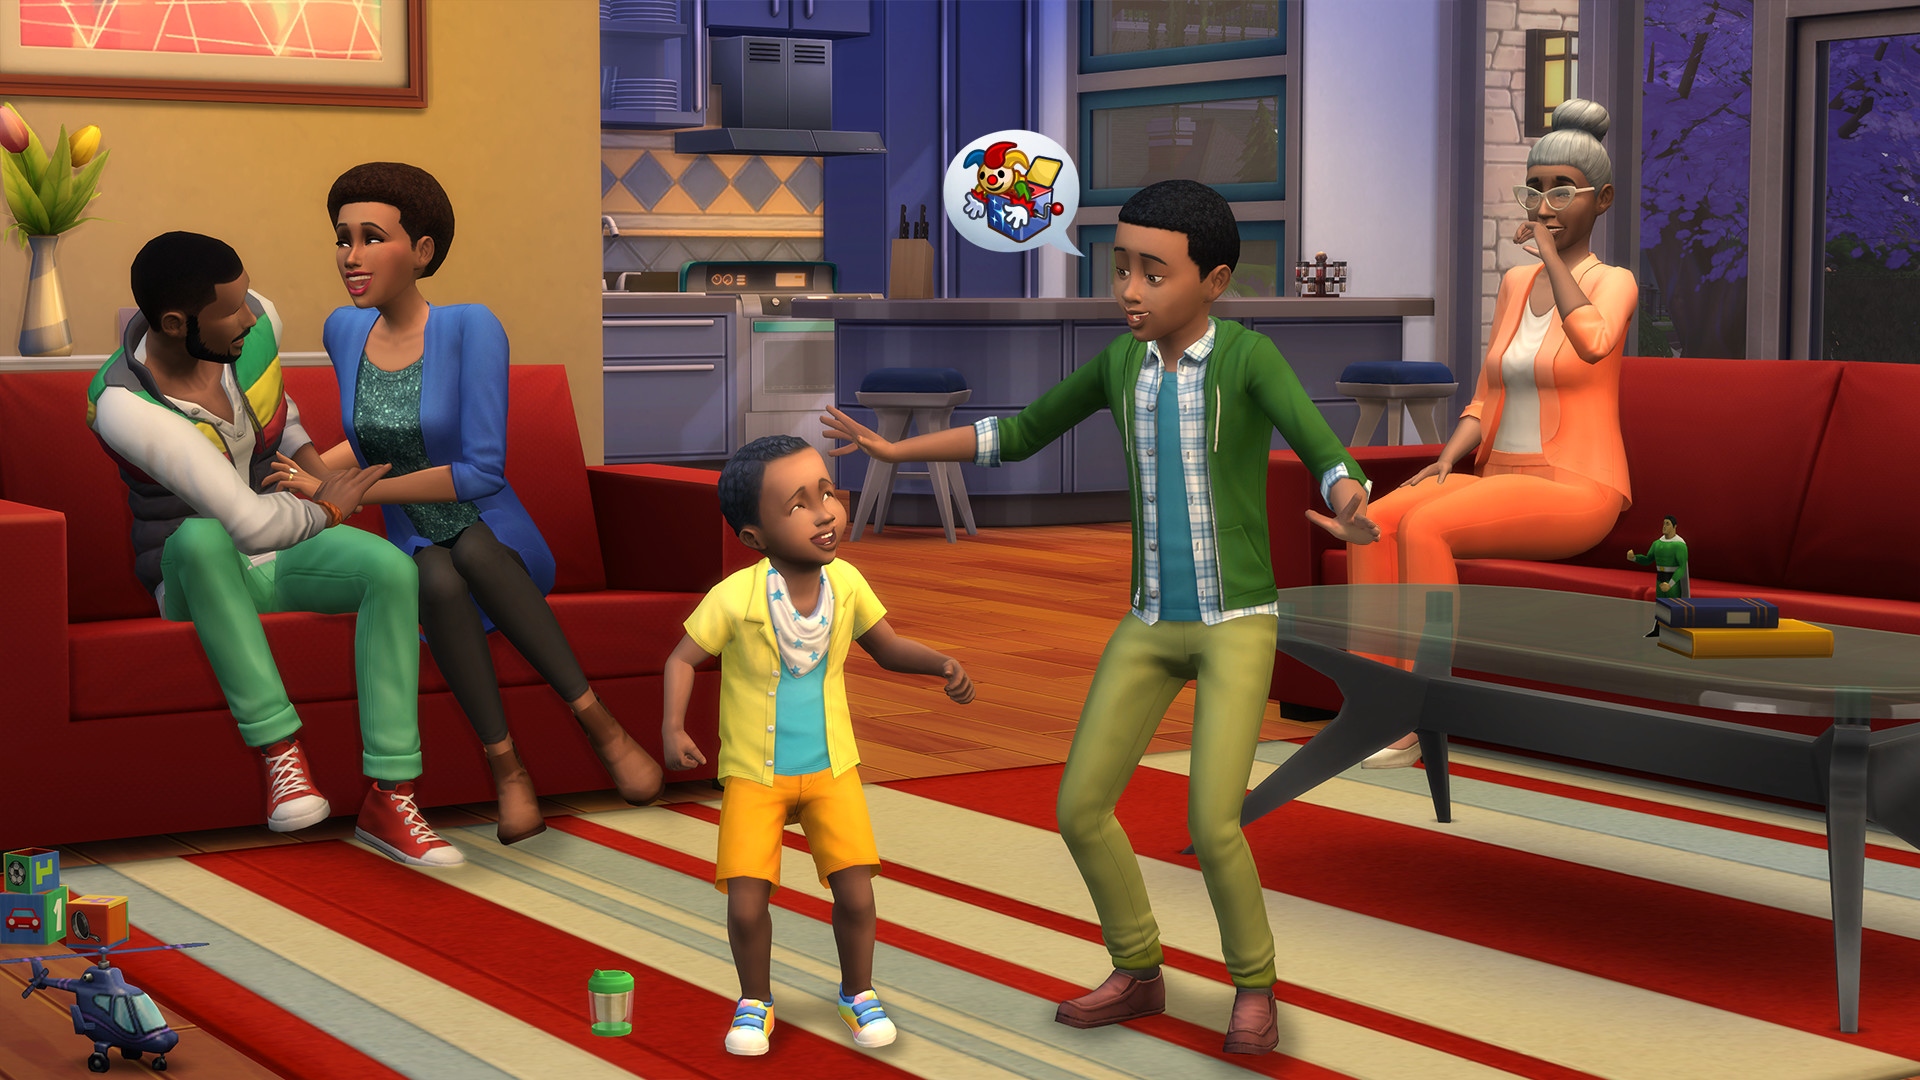 Best free Steam games: The Sims 4. Image shows a Sim family chatting and having fun in their living room.